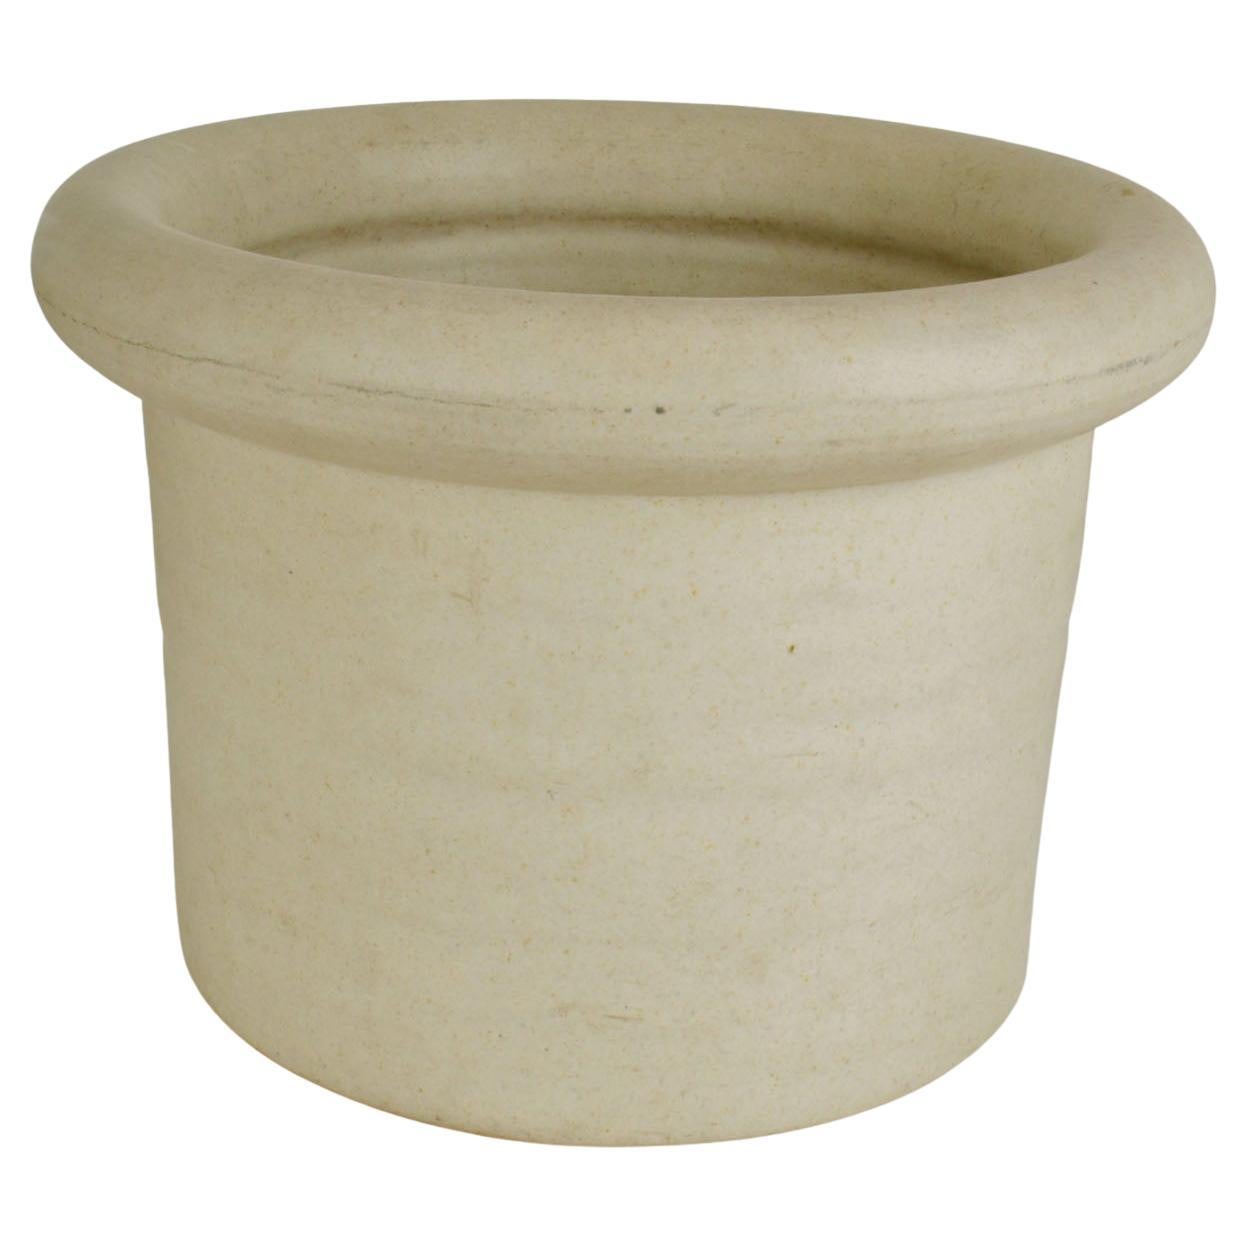 Studio Pottery planter created on the turning wheel by sophisticated and advanced skilled Dutch ceramist Piet Knepper for Mobach Studio, Utrecht in the Netherlands 1970's. The cylinder shape planter has an over sized rim to make the plant stand out